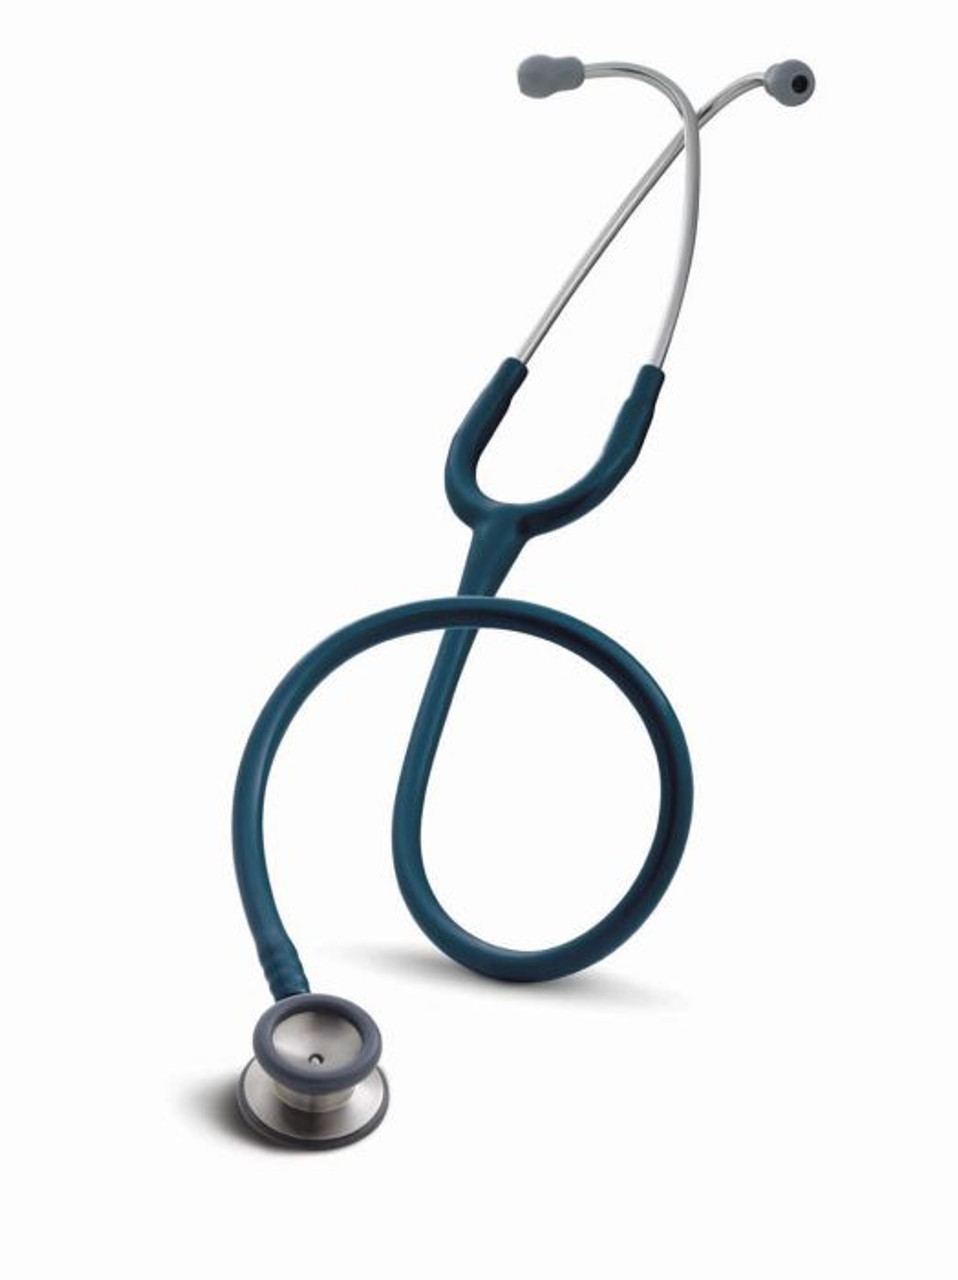 Clinical 1 Stethoscope